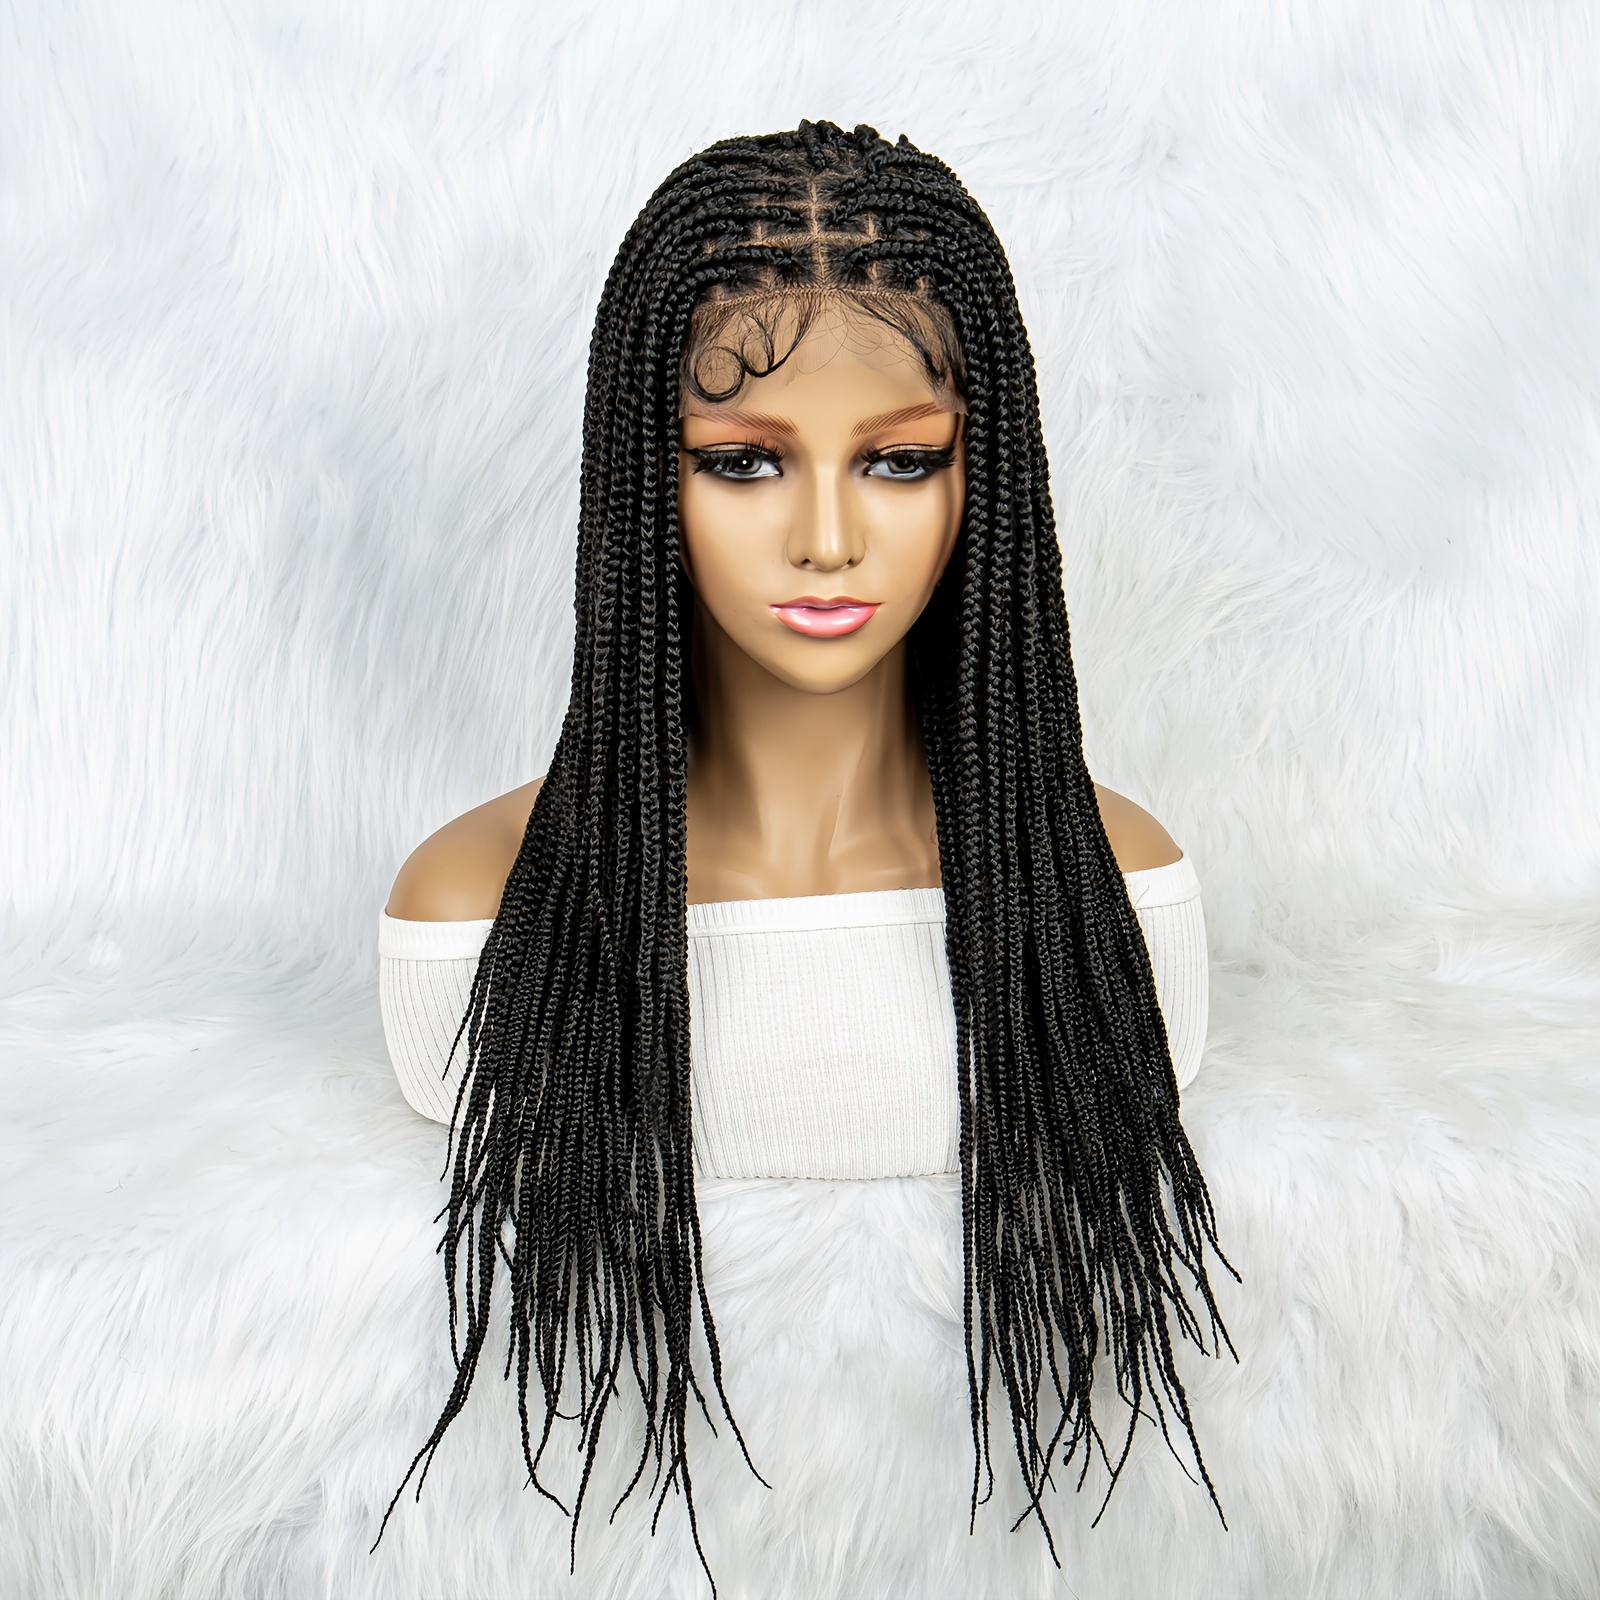  Roiifur HD Full Lace Braided Wigs for Women Triangle